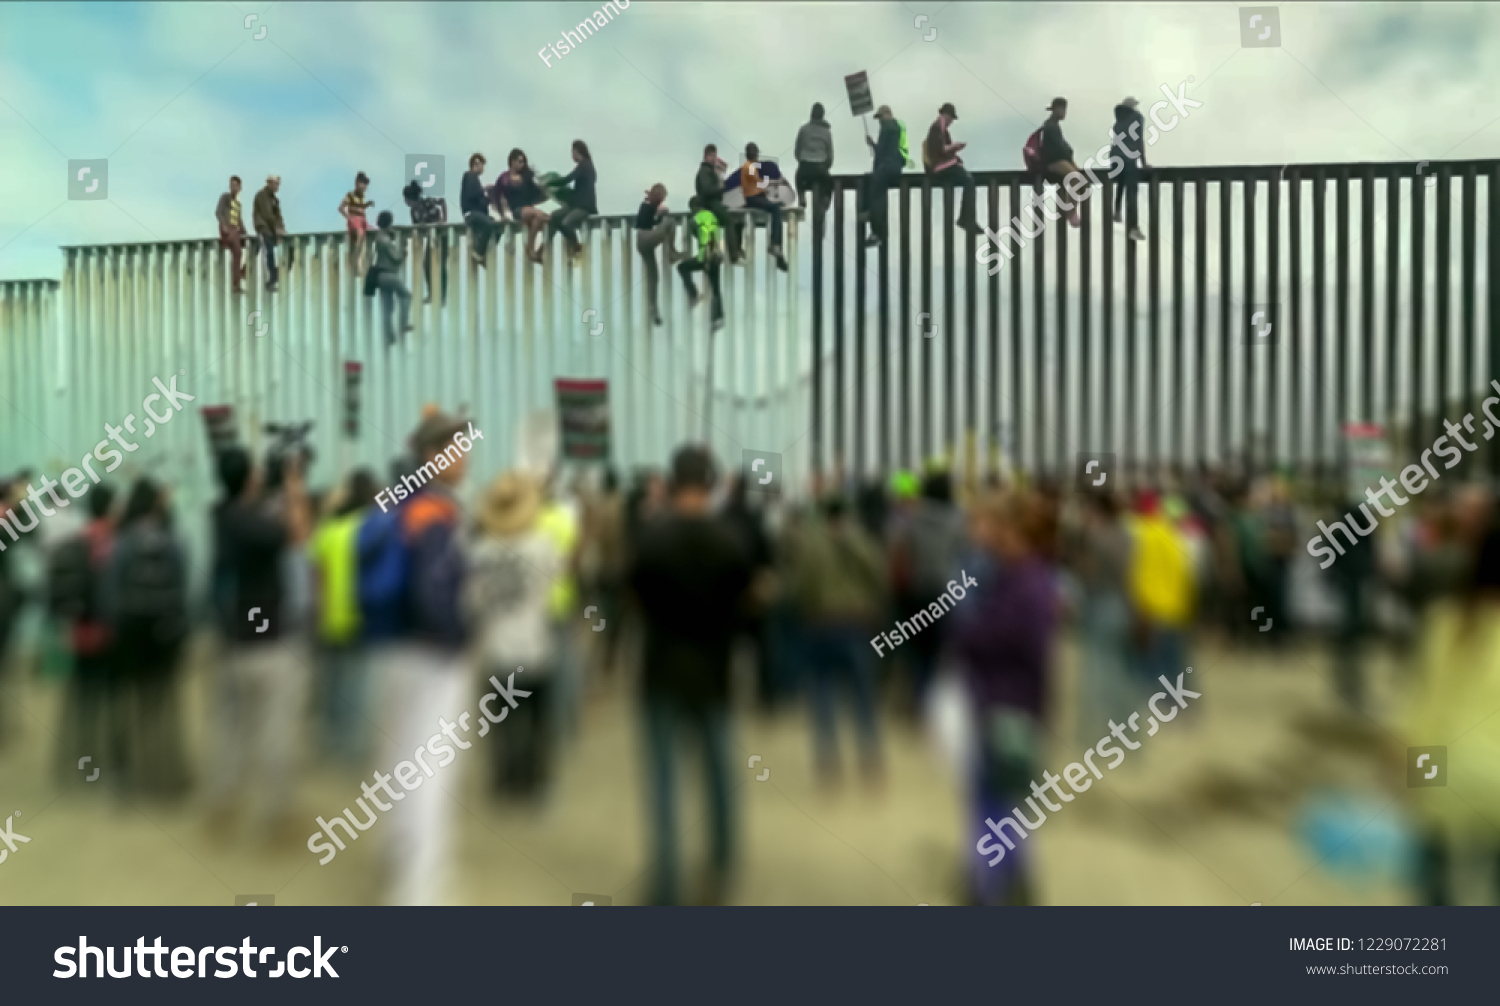 Abstract, blur, bokeh background, defocusing - image for the background. The concept of illegal migration from Mexico to the United States #1229072281